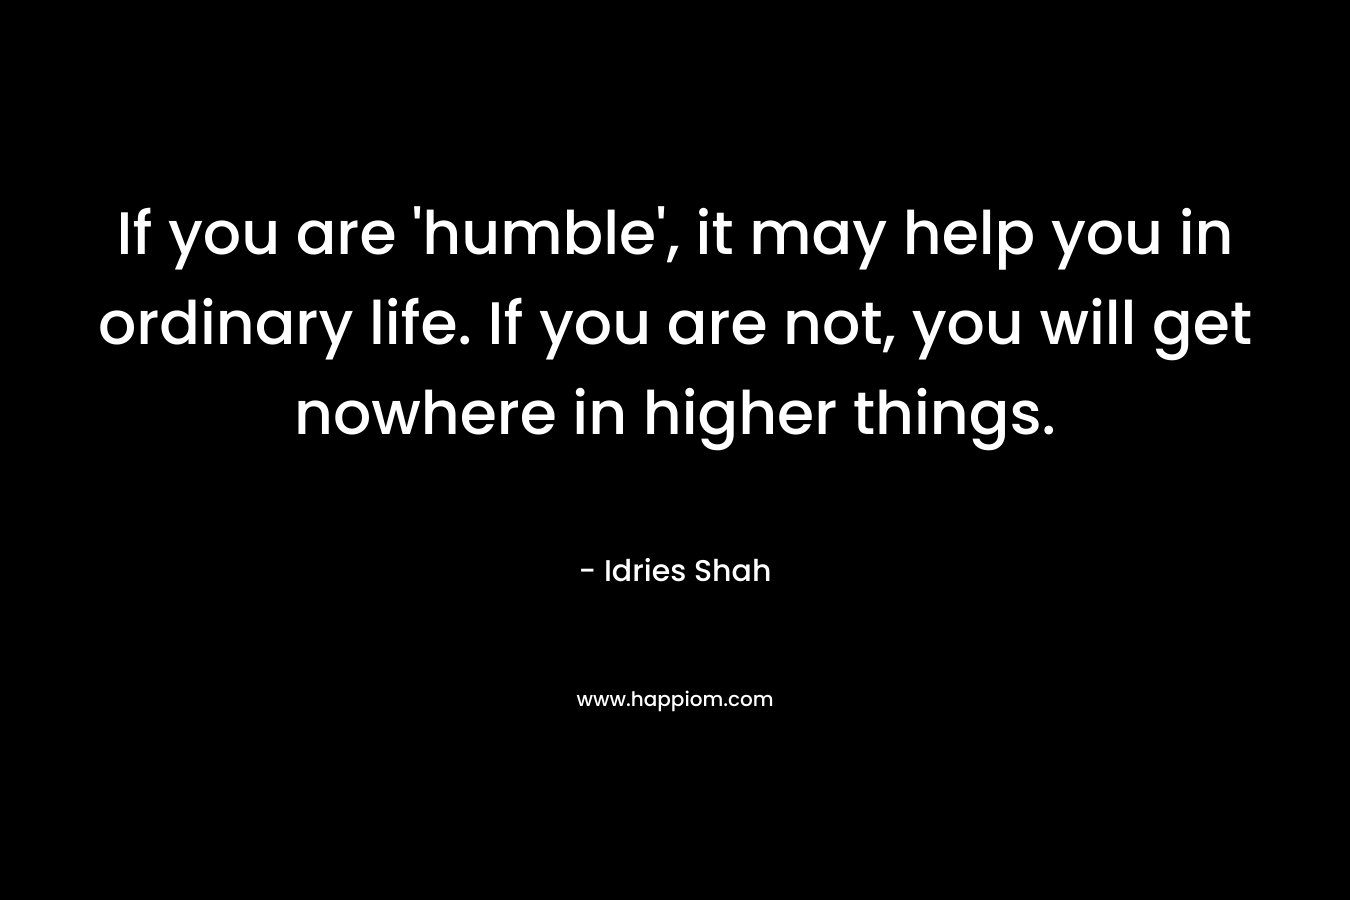 If you are ‘humble’, it may help you in ordinary life. If you are not, you will get nowhere in higher things. – Idries Shah